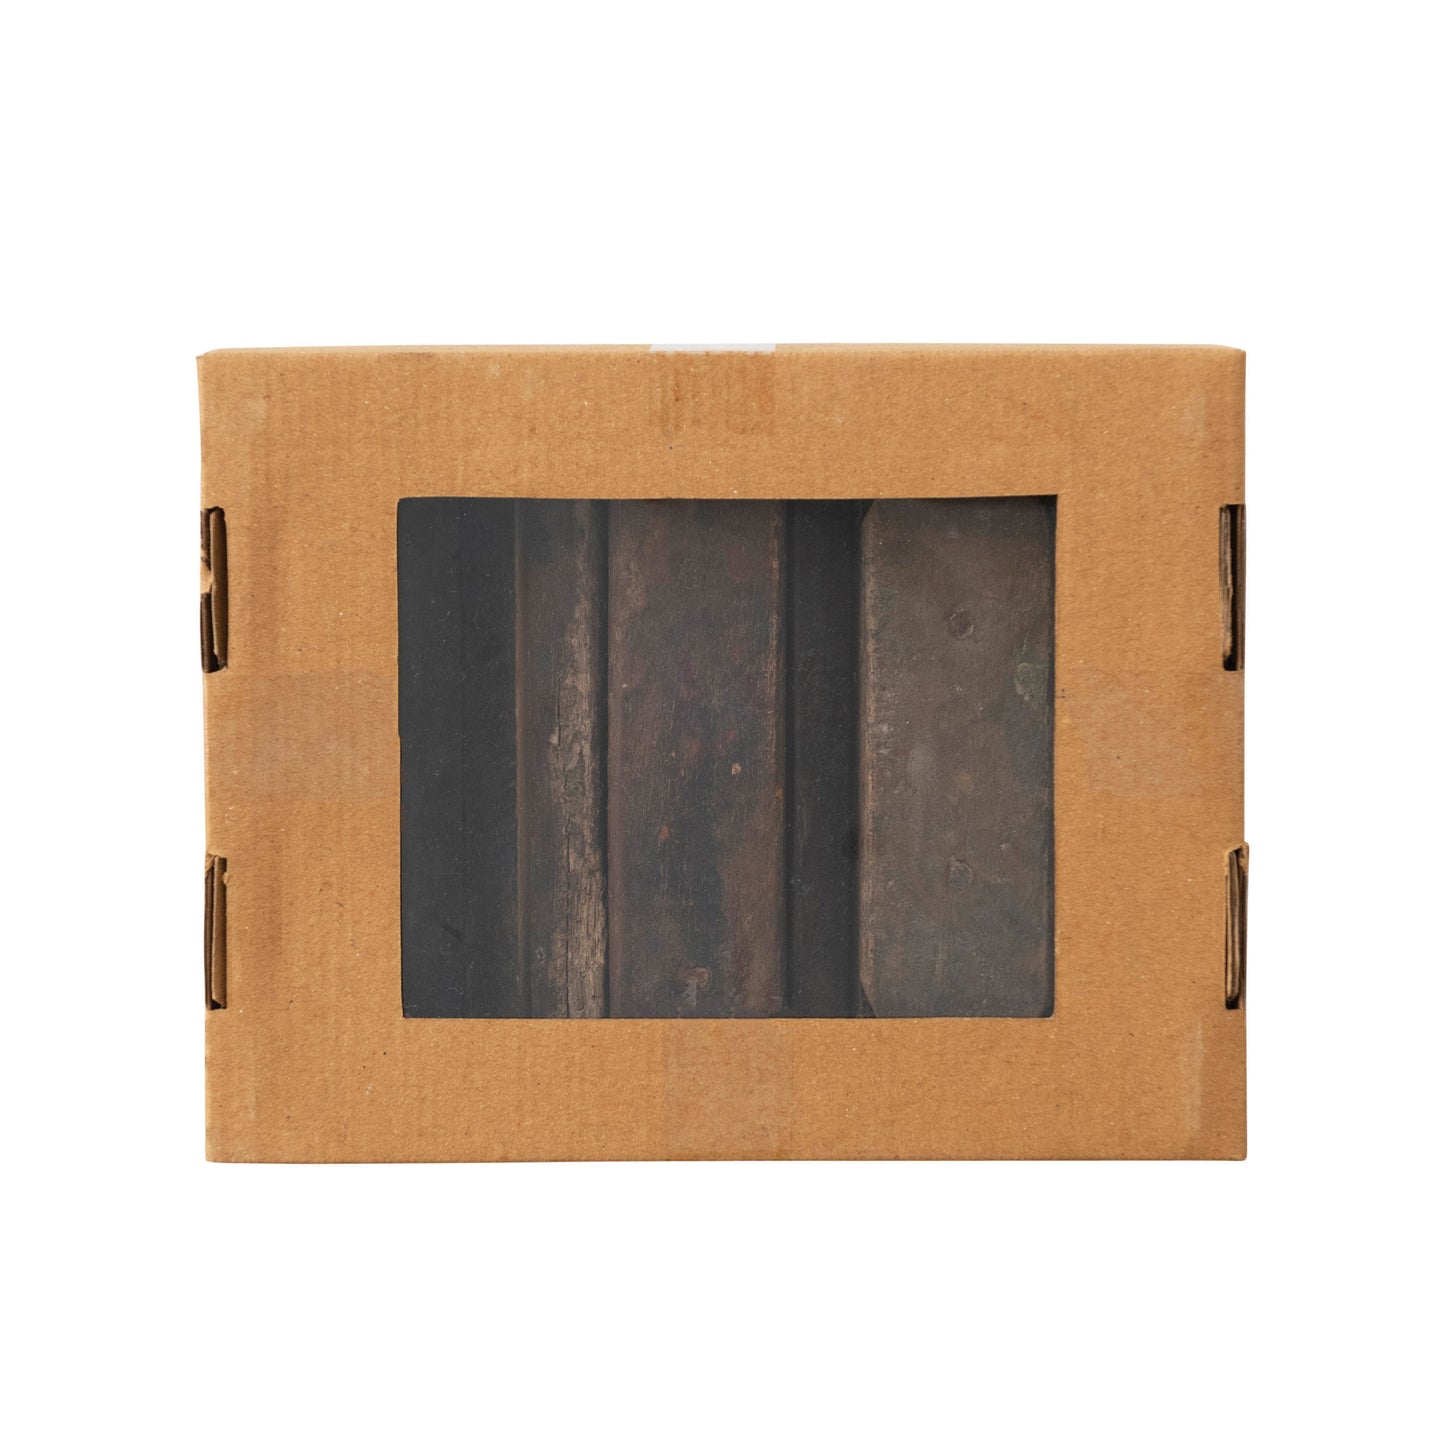 Individual Reclaimed Photo/Card Holder